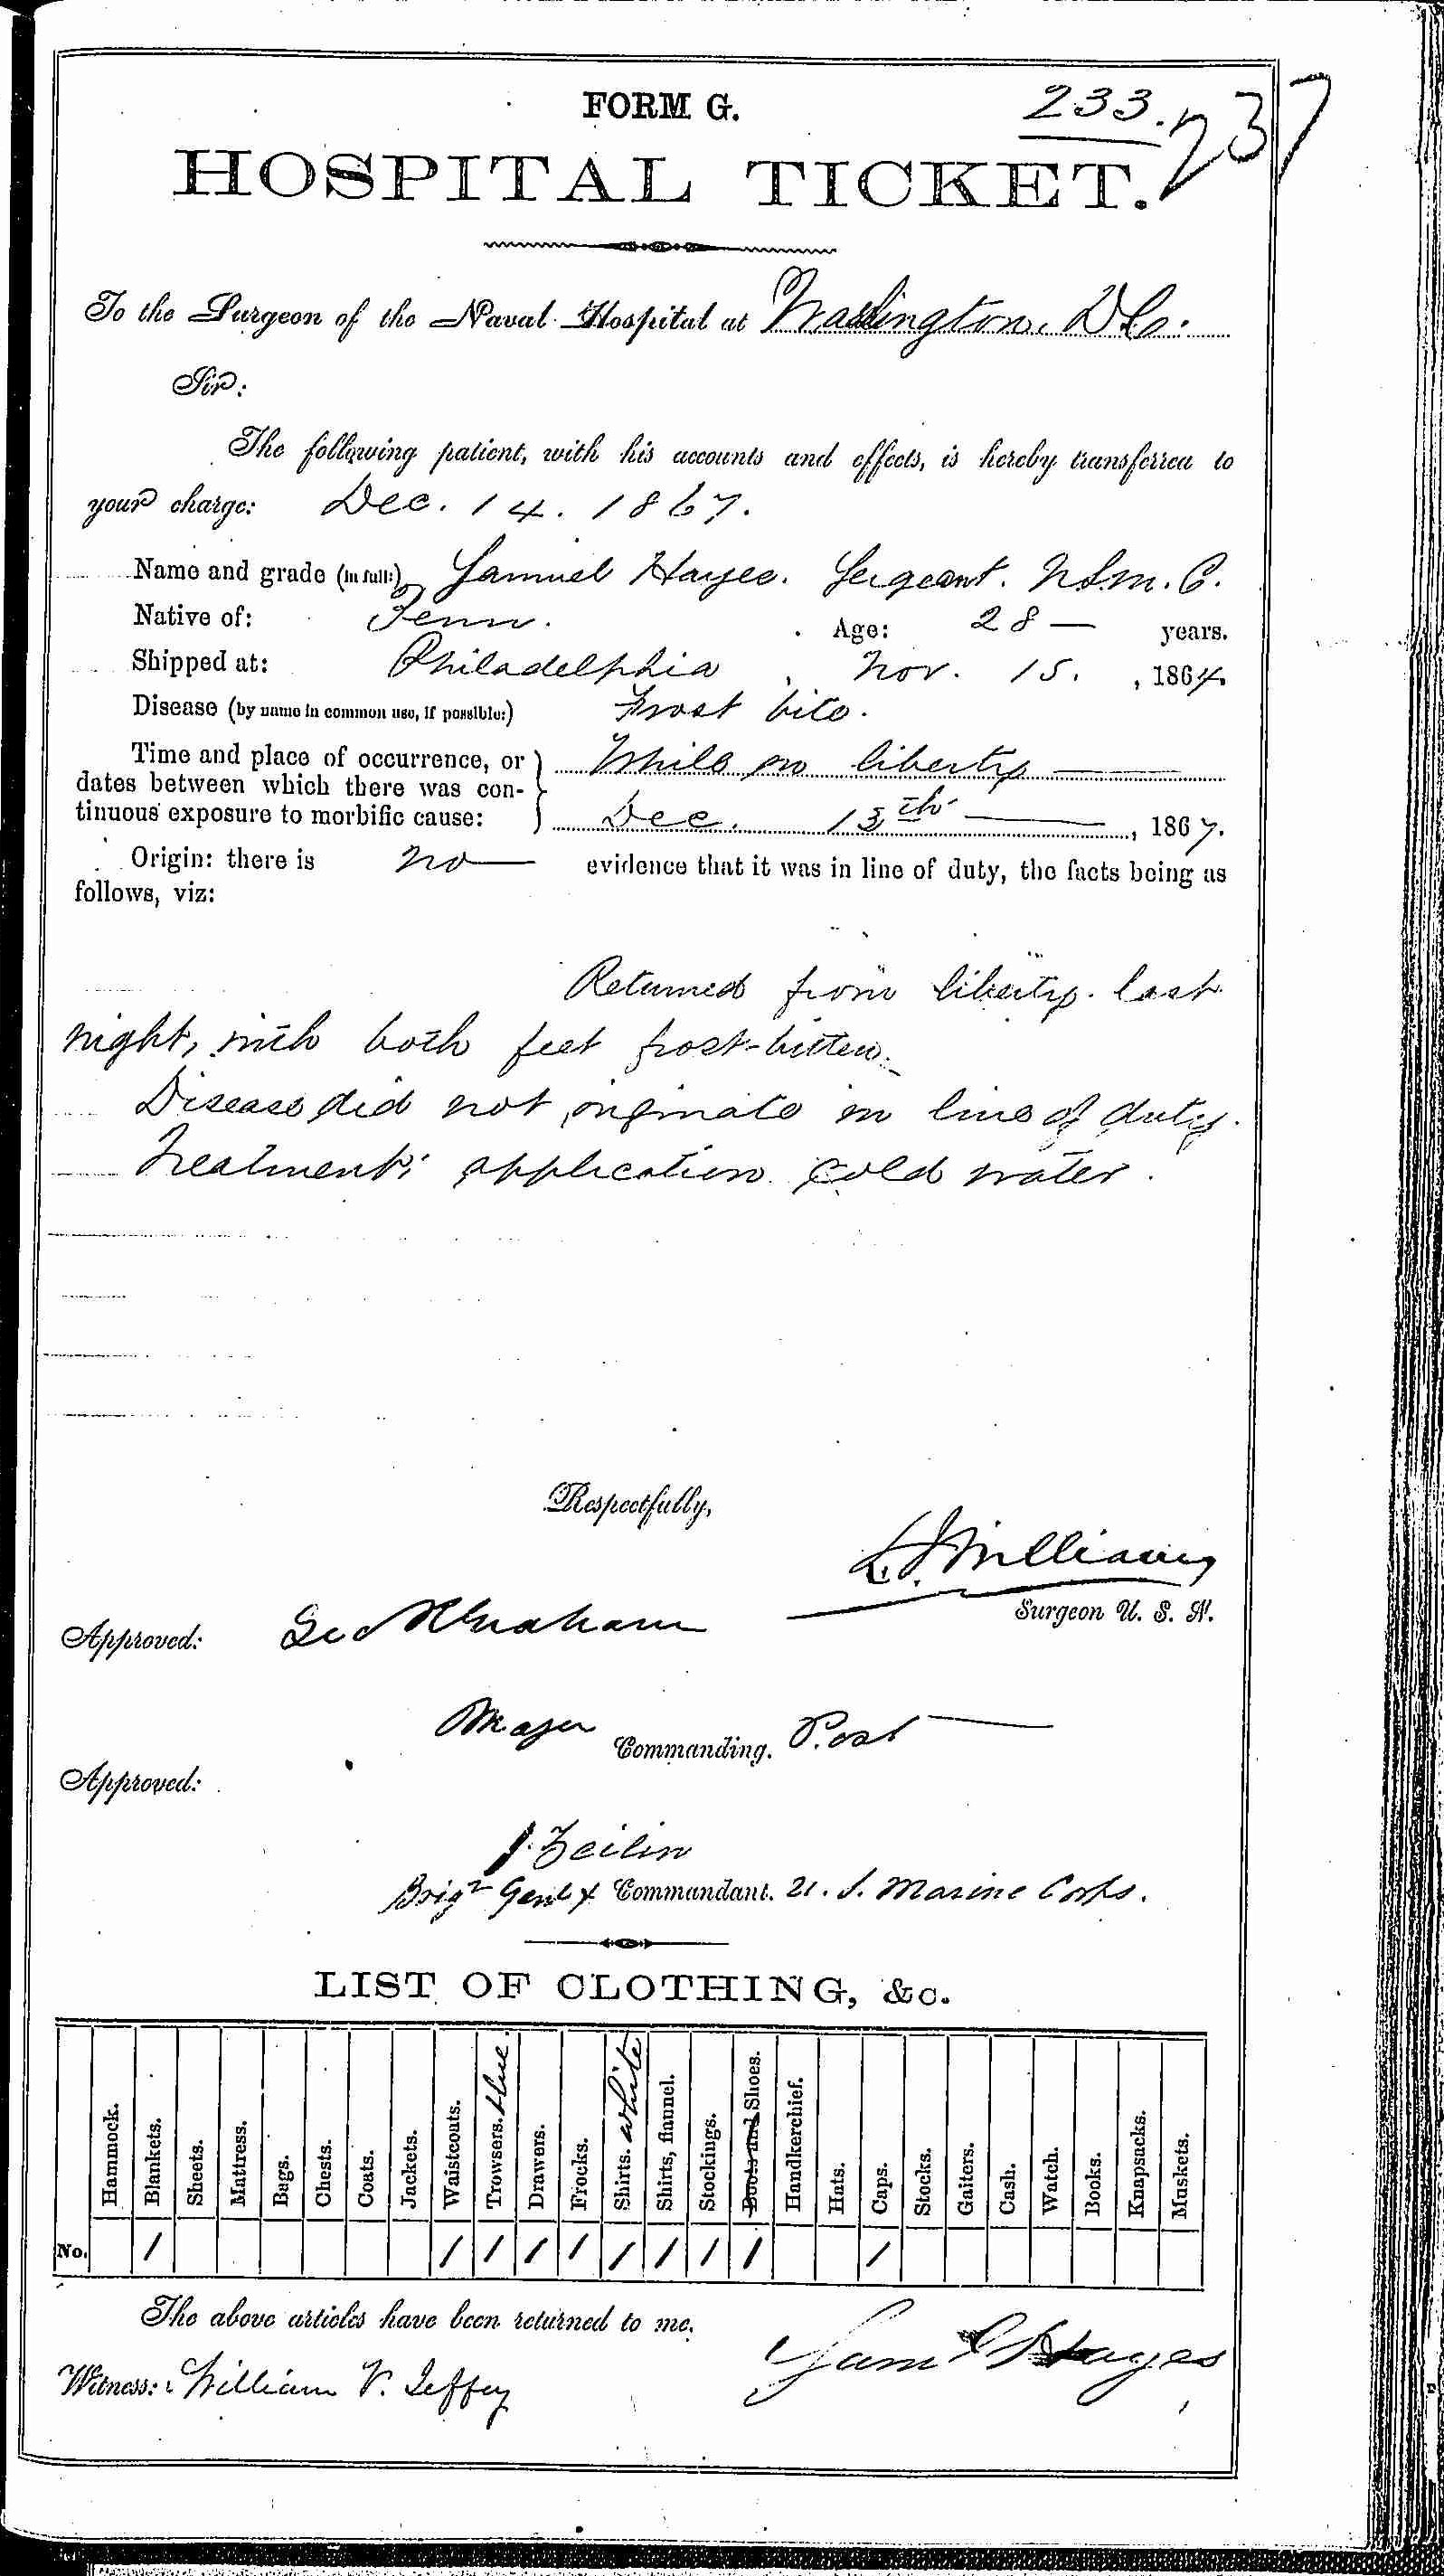 Entry for Samuel Hayes (second admission page 1 of 2) in the log Hospital Tickets and Case Papers - Naval Hospital - Washington, D.C. - 1866-68